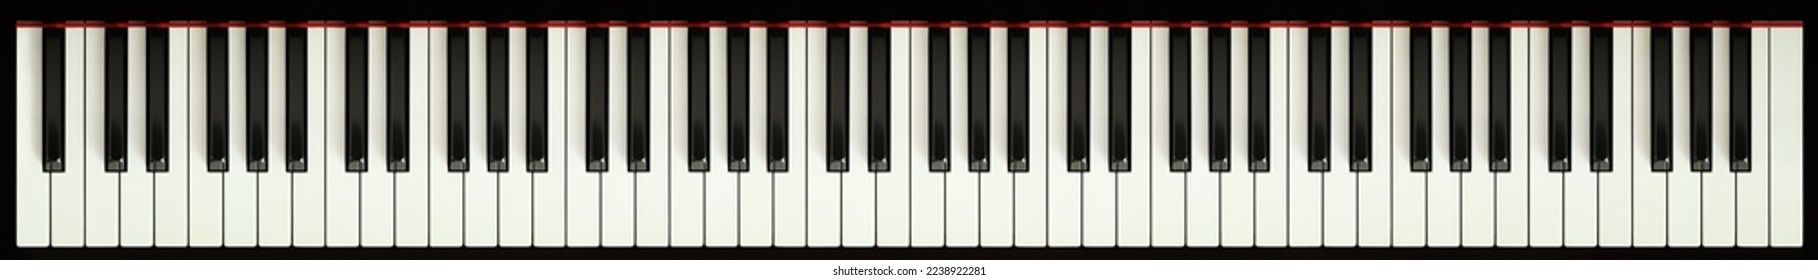 Acoustic piano keyboard, shot in natural light. - Powered by Shutterstock